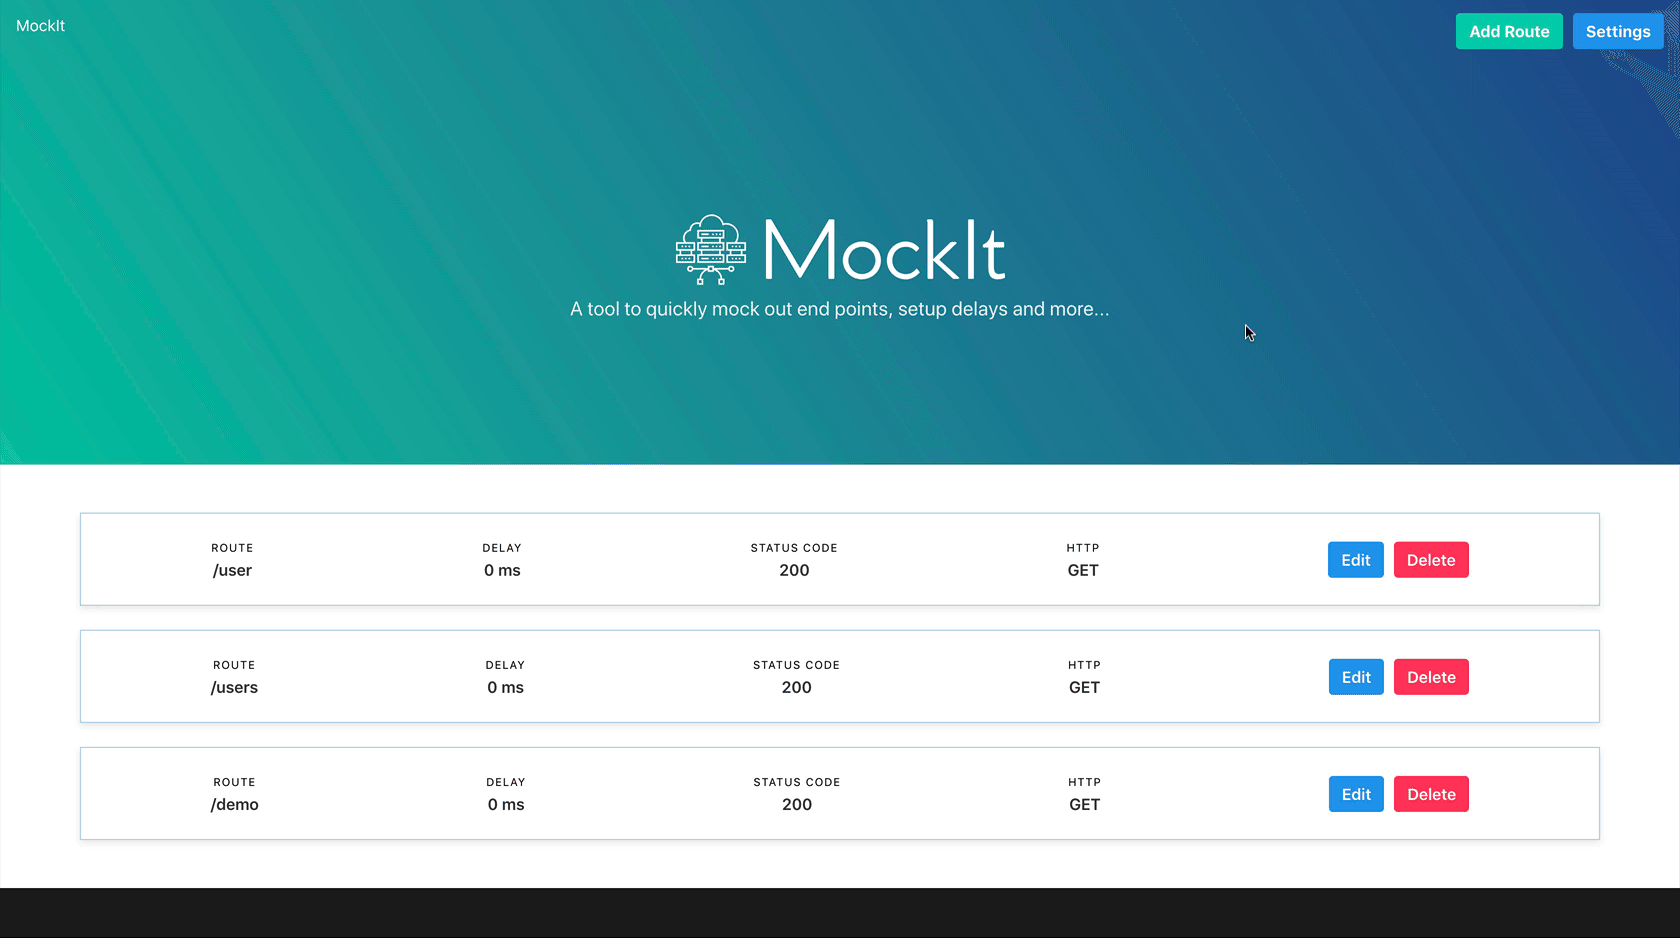 A tool to quickly mock out end points, setup delays, and more...